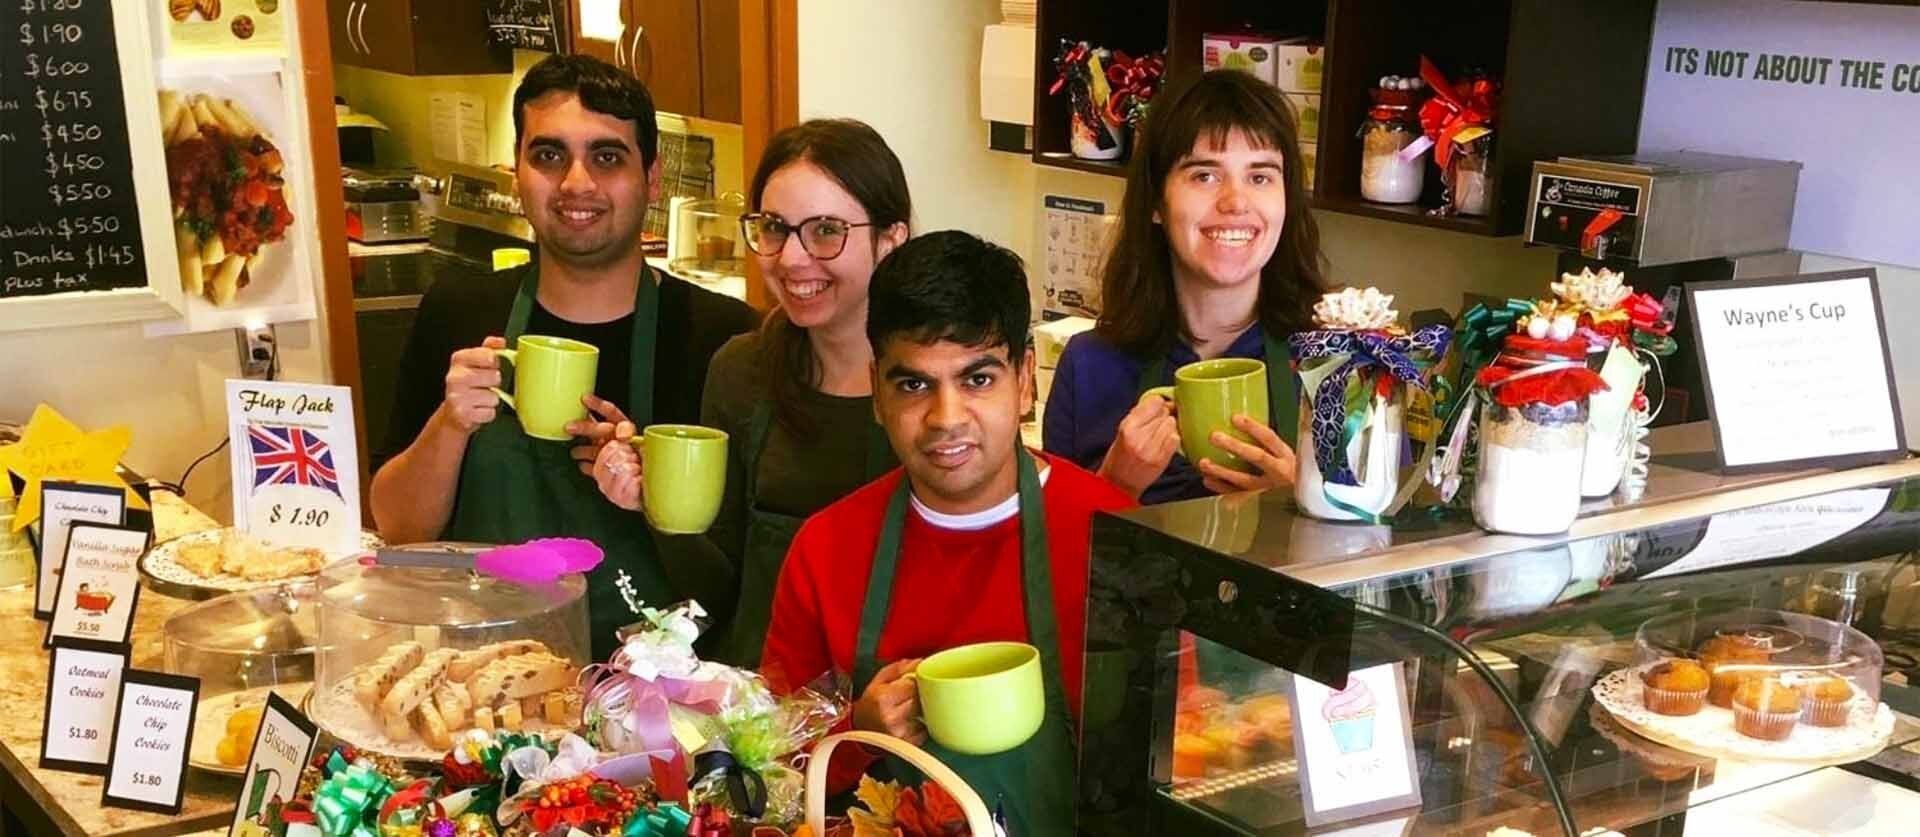 Students with cups of coffee in Wayne's Cup Café